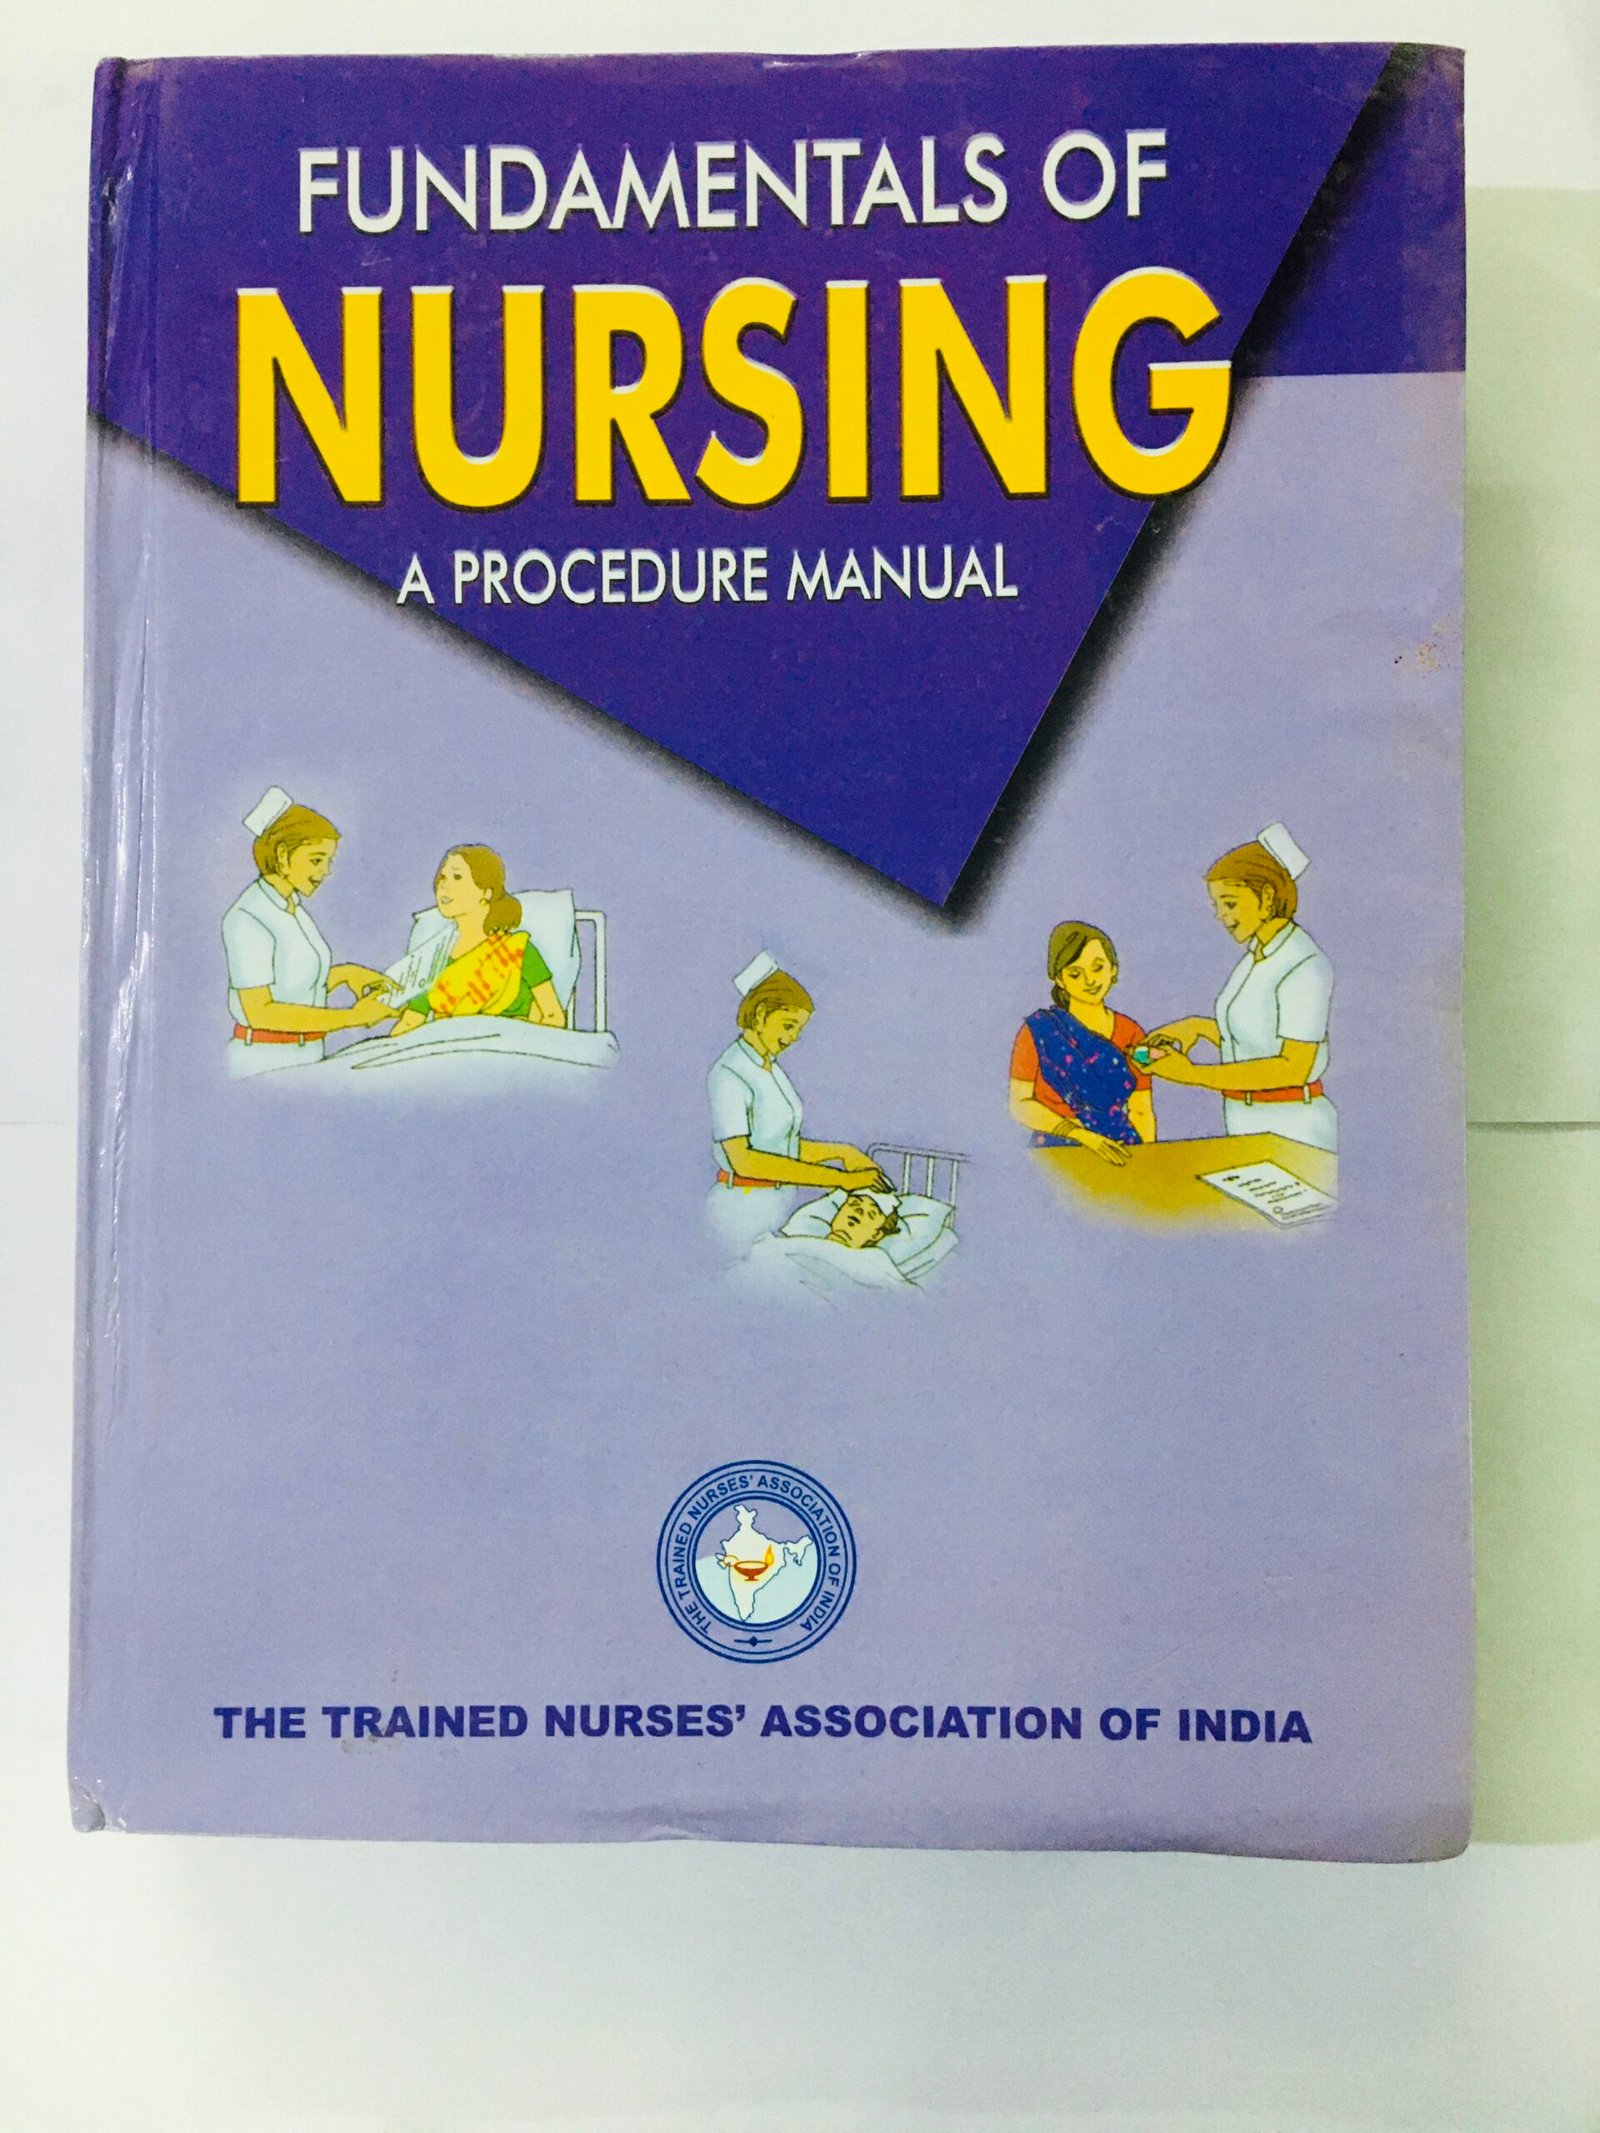 research book for bsc nursing